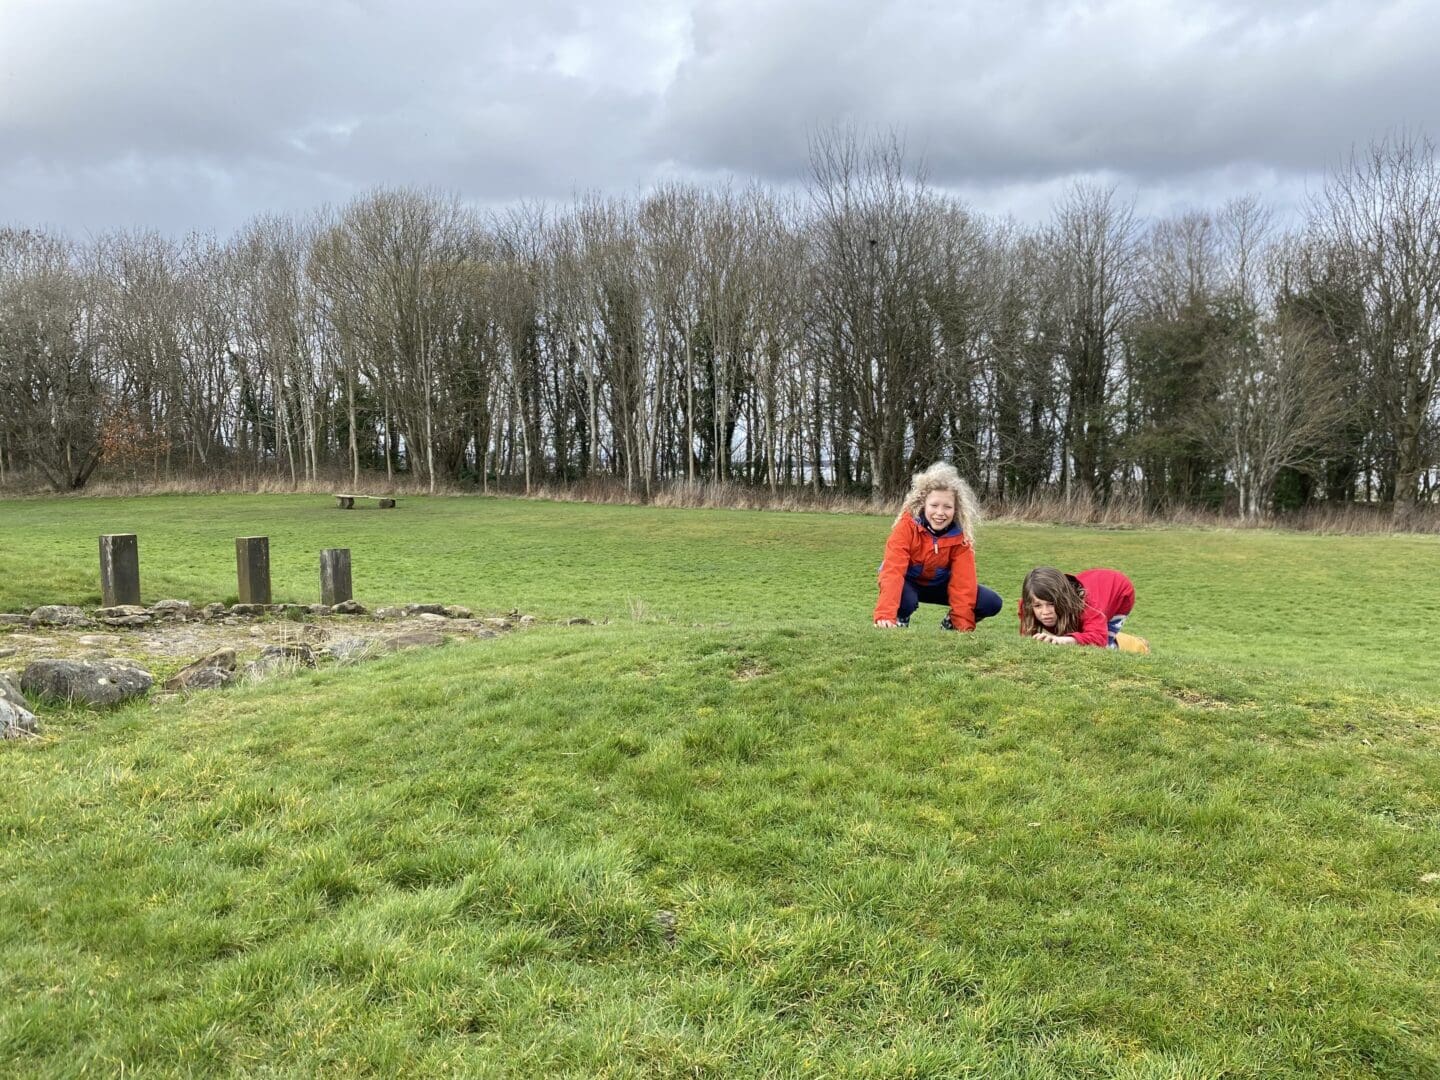 Children pretending to be Picts attacking the Antonine wall